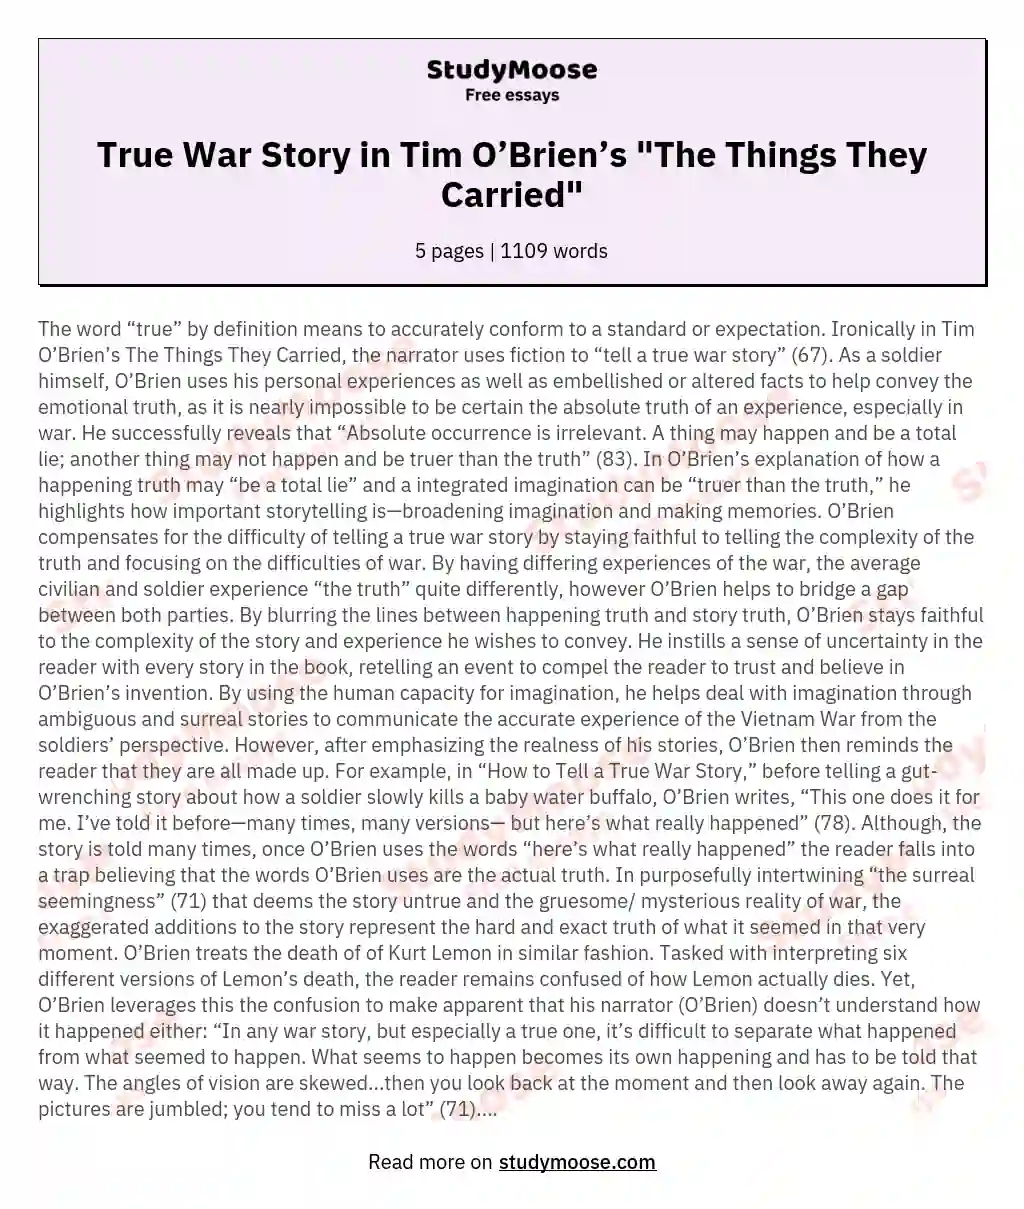 True War Story in Tim O’Brien’s "The Things They Carried"